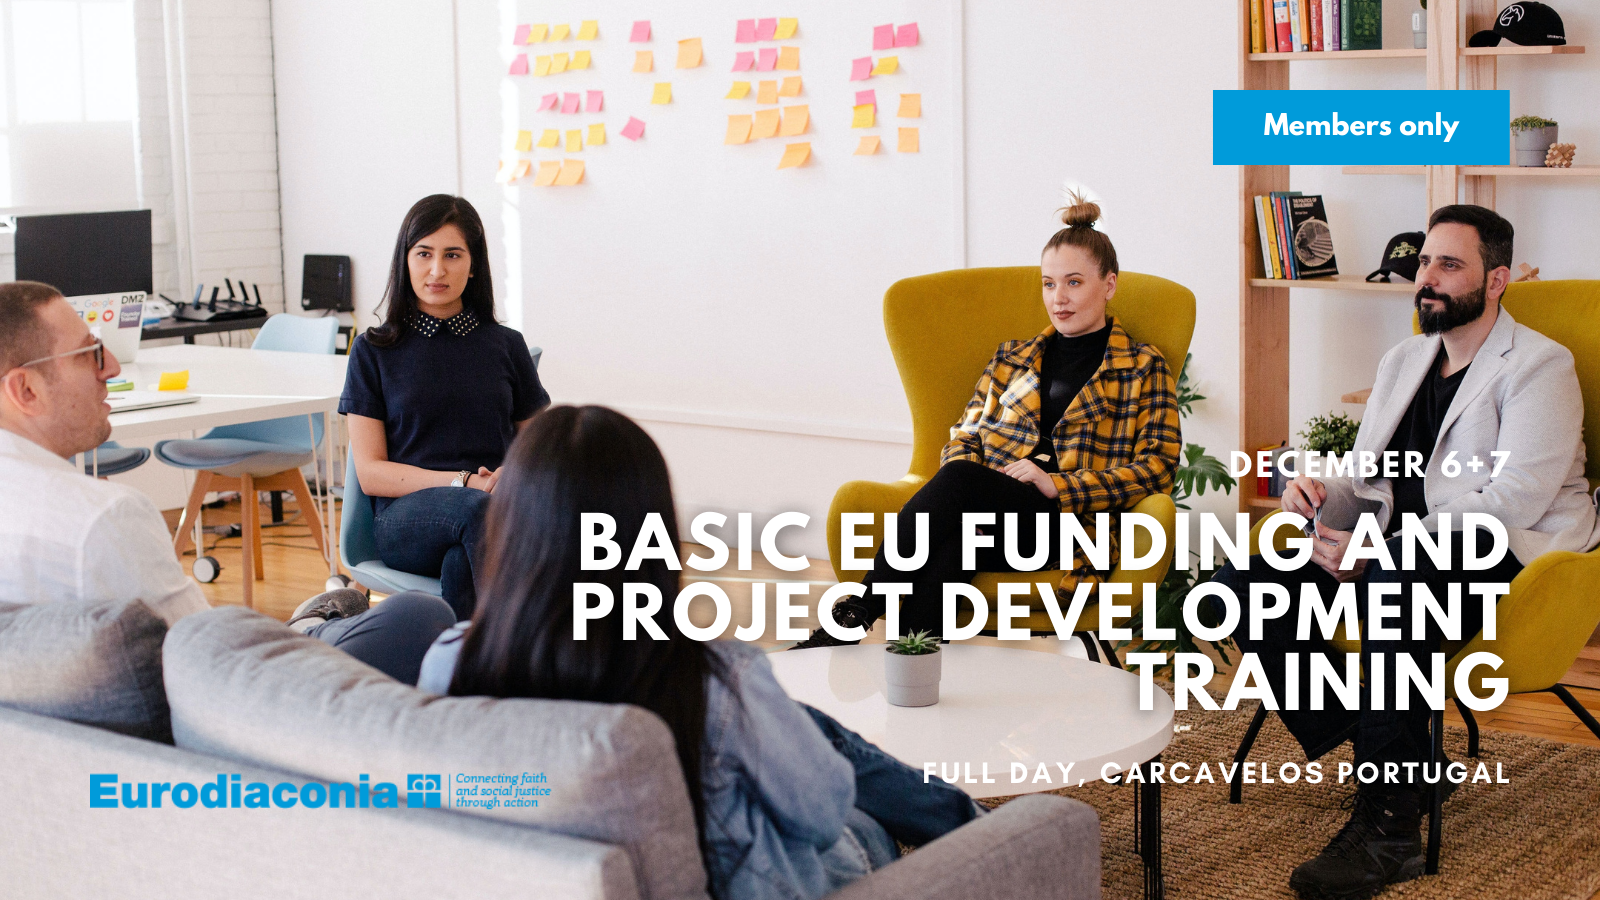 Basic EU Funding and Project Development training | Training Members Only